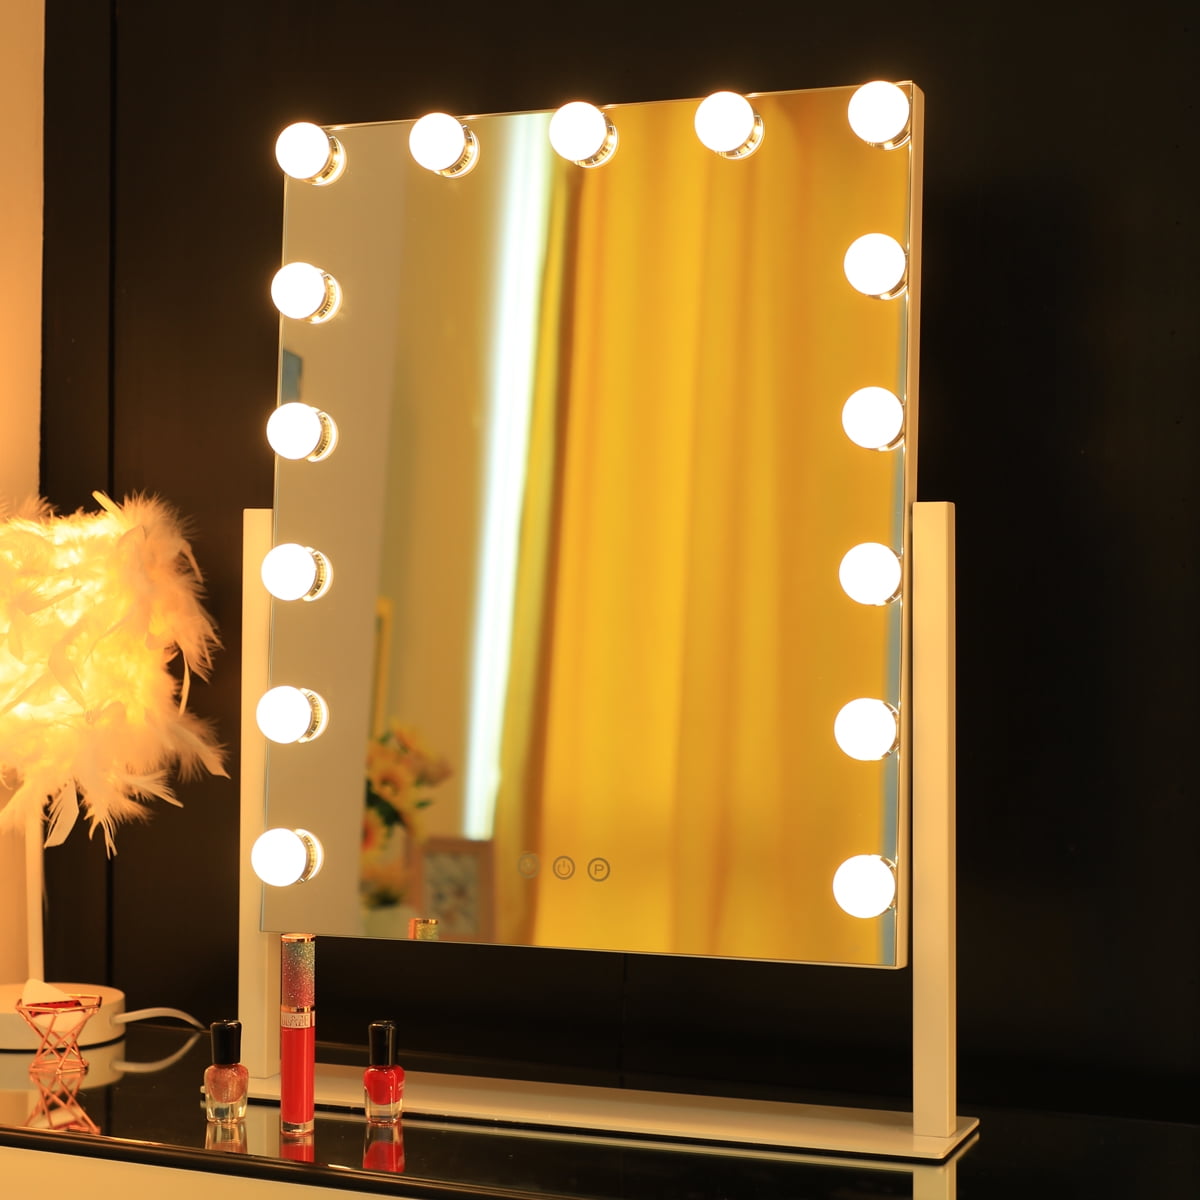 HOMPEN Makeup Vanity Mirror with Lights, Hollywood Mauritius Ubuy